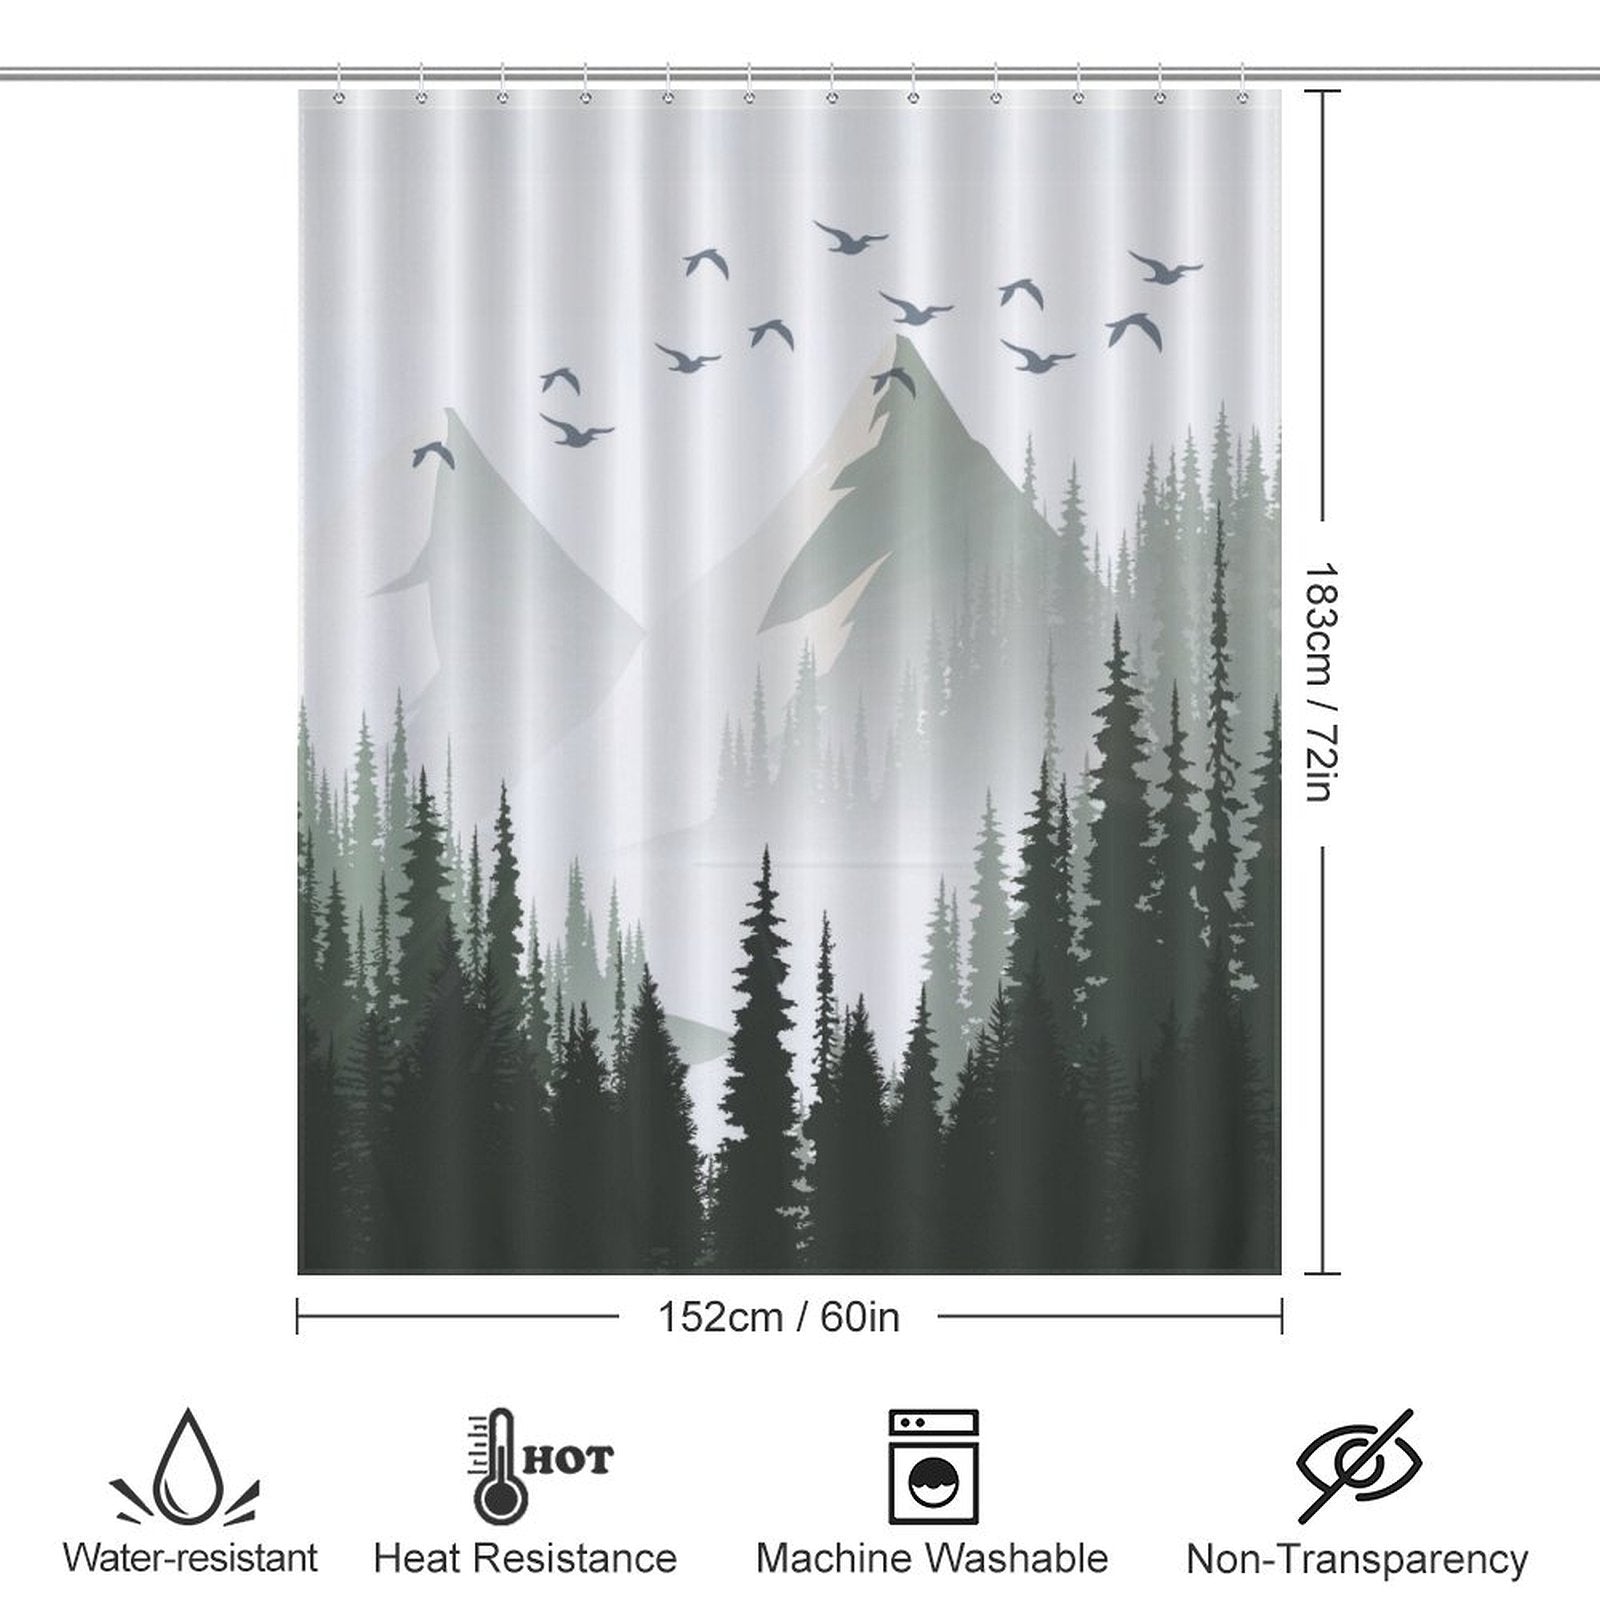 Green Misty Forest Shower Curtain Ombre Sage Green White Nature Tree Mountain Woodland-Cottoncat by Cotton Cat, featuring flying birds at the top. Dimensions are 183cm x 152cm. Icons at the bottom indicate water resistance, heat resistance, machine washable, and non-transparency. Ideal for elevating your Bathroom Decor into a tranquil escape.